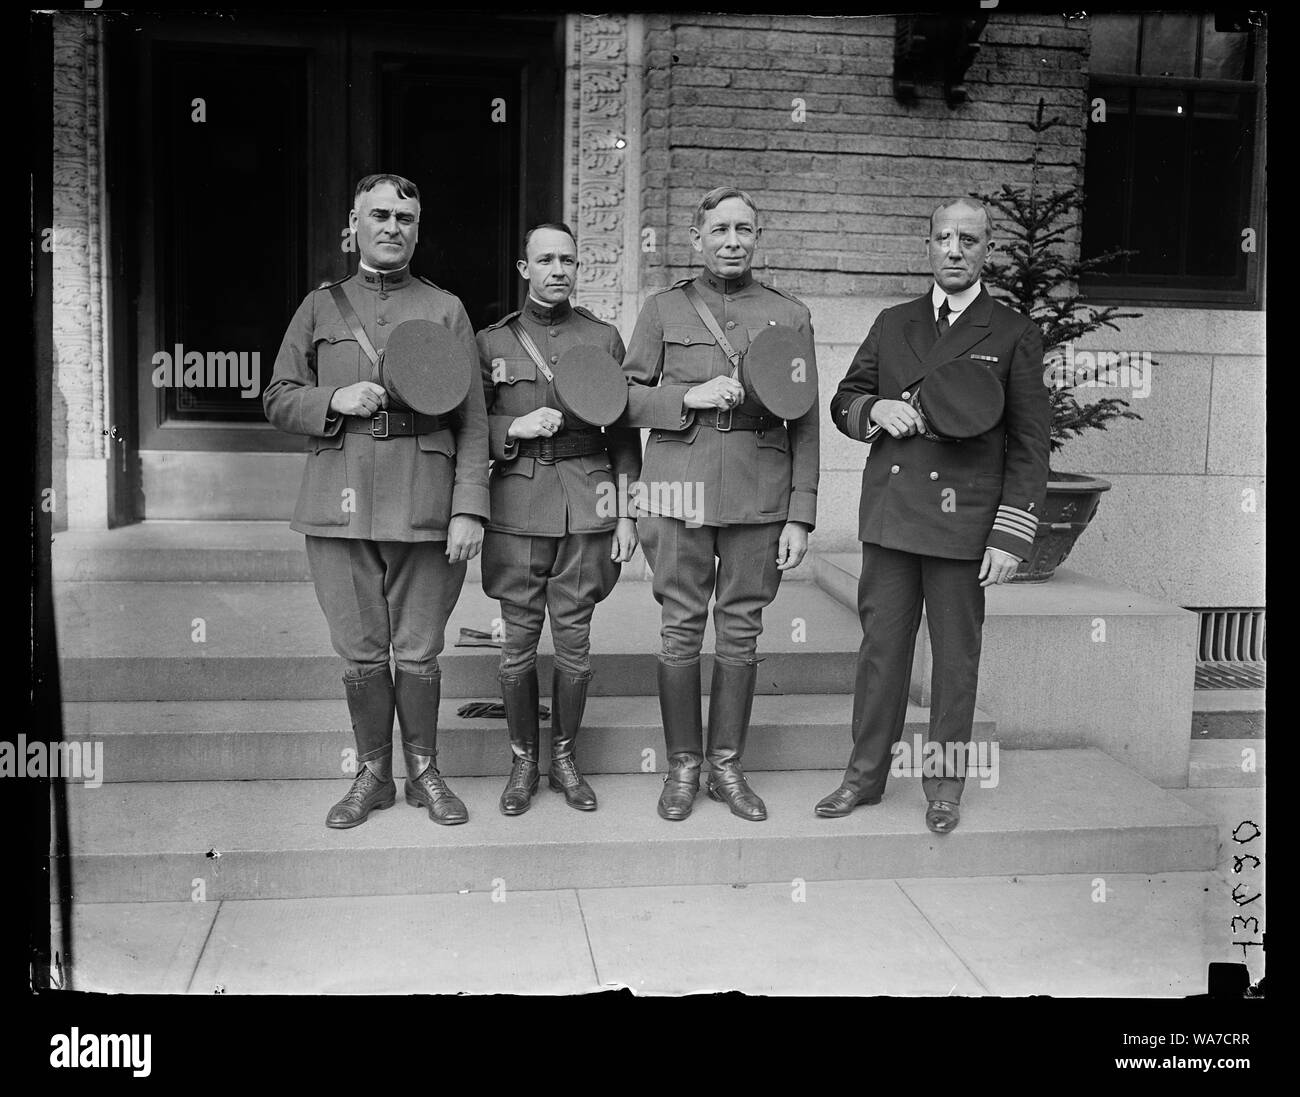 Army and Navy Chaplains who will officiate at the burial of An Unknown American Soldier at Arlington National Cemetery, November 11th, 1921. Left to right: Chaplain John T. Axton, D.S.M, Chief of Chaplains, U.S.A.; Dr. Norris S. Lazaron, Chaplain at Large, U.S.A. Right Rev. Charles H. Brent, D.S.M., Senior Chaplain American Expeditionary Forces; and Chaplain John B. Frazier, Supervisor Chaplains Corps, U.S.N. Stock Photo